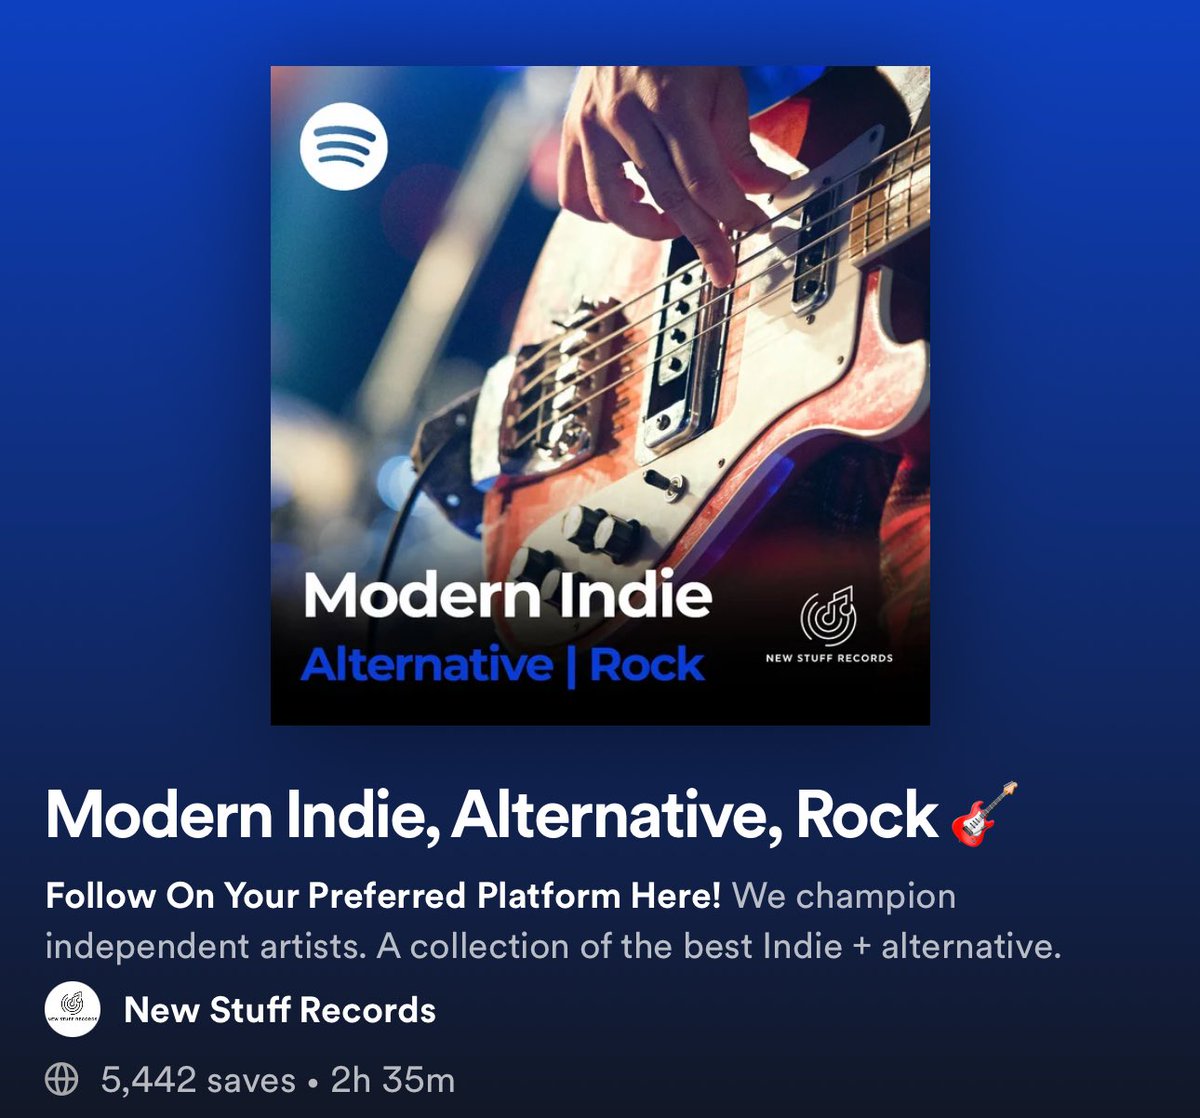 URGENT 24H OPPORTUNITY #2 I need 10 MORE indie/alternative/rock independent bands for my Modern Indie playlist, insane growth recently! 📈 To be considered 1) listen to my track ‘Taking Over’ 2) say what you think of it 3) and leave your link to your bands song submission in the…